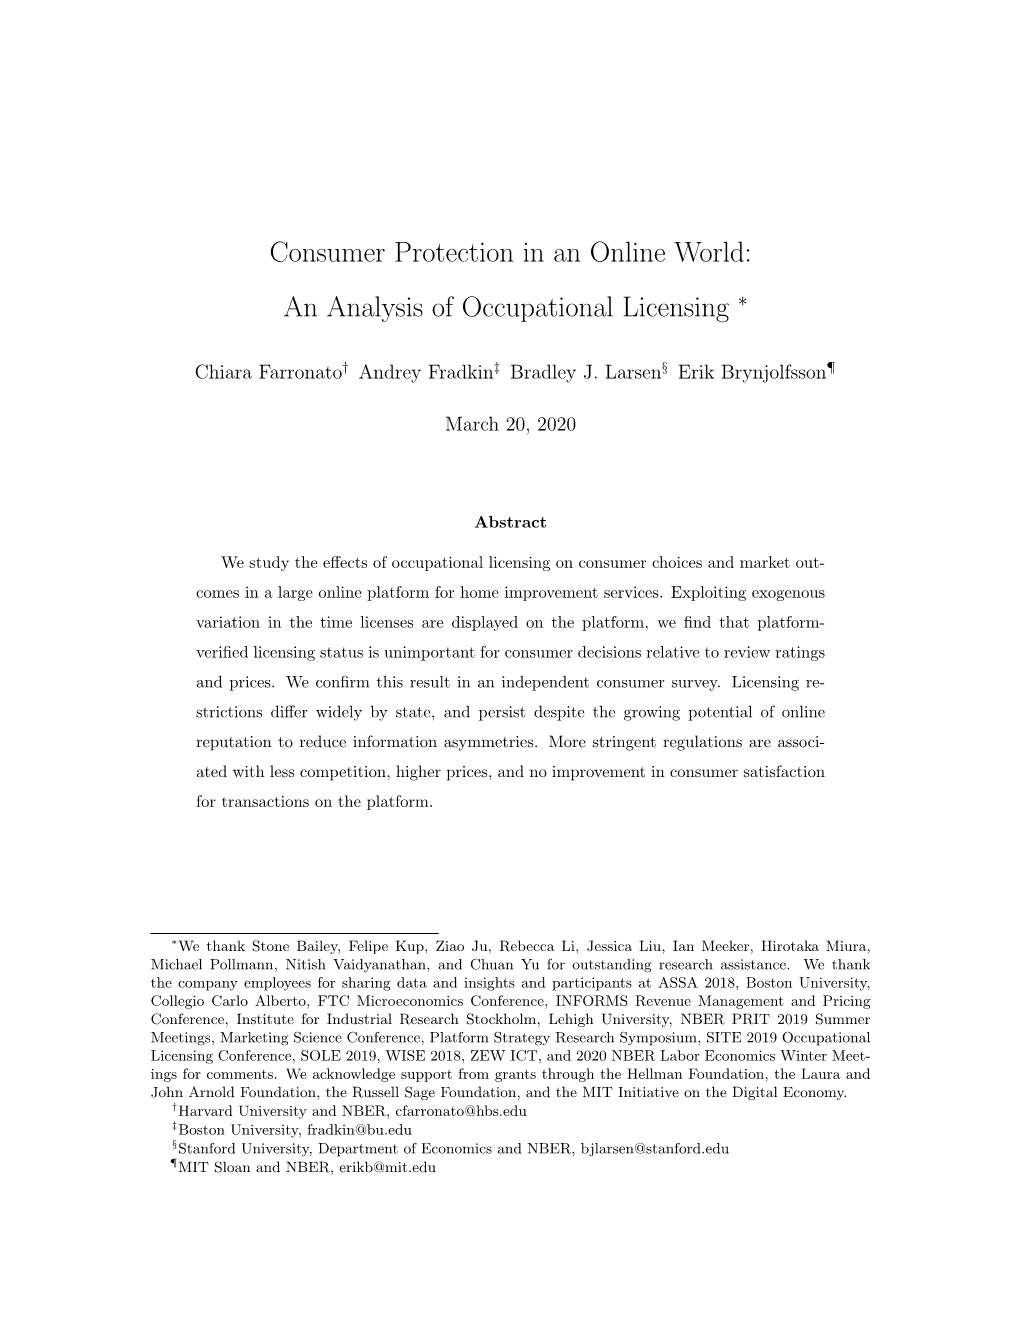 Consumer Protection in an Online World: an Analysis of Occupational Licensing ∗